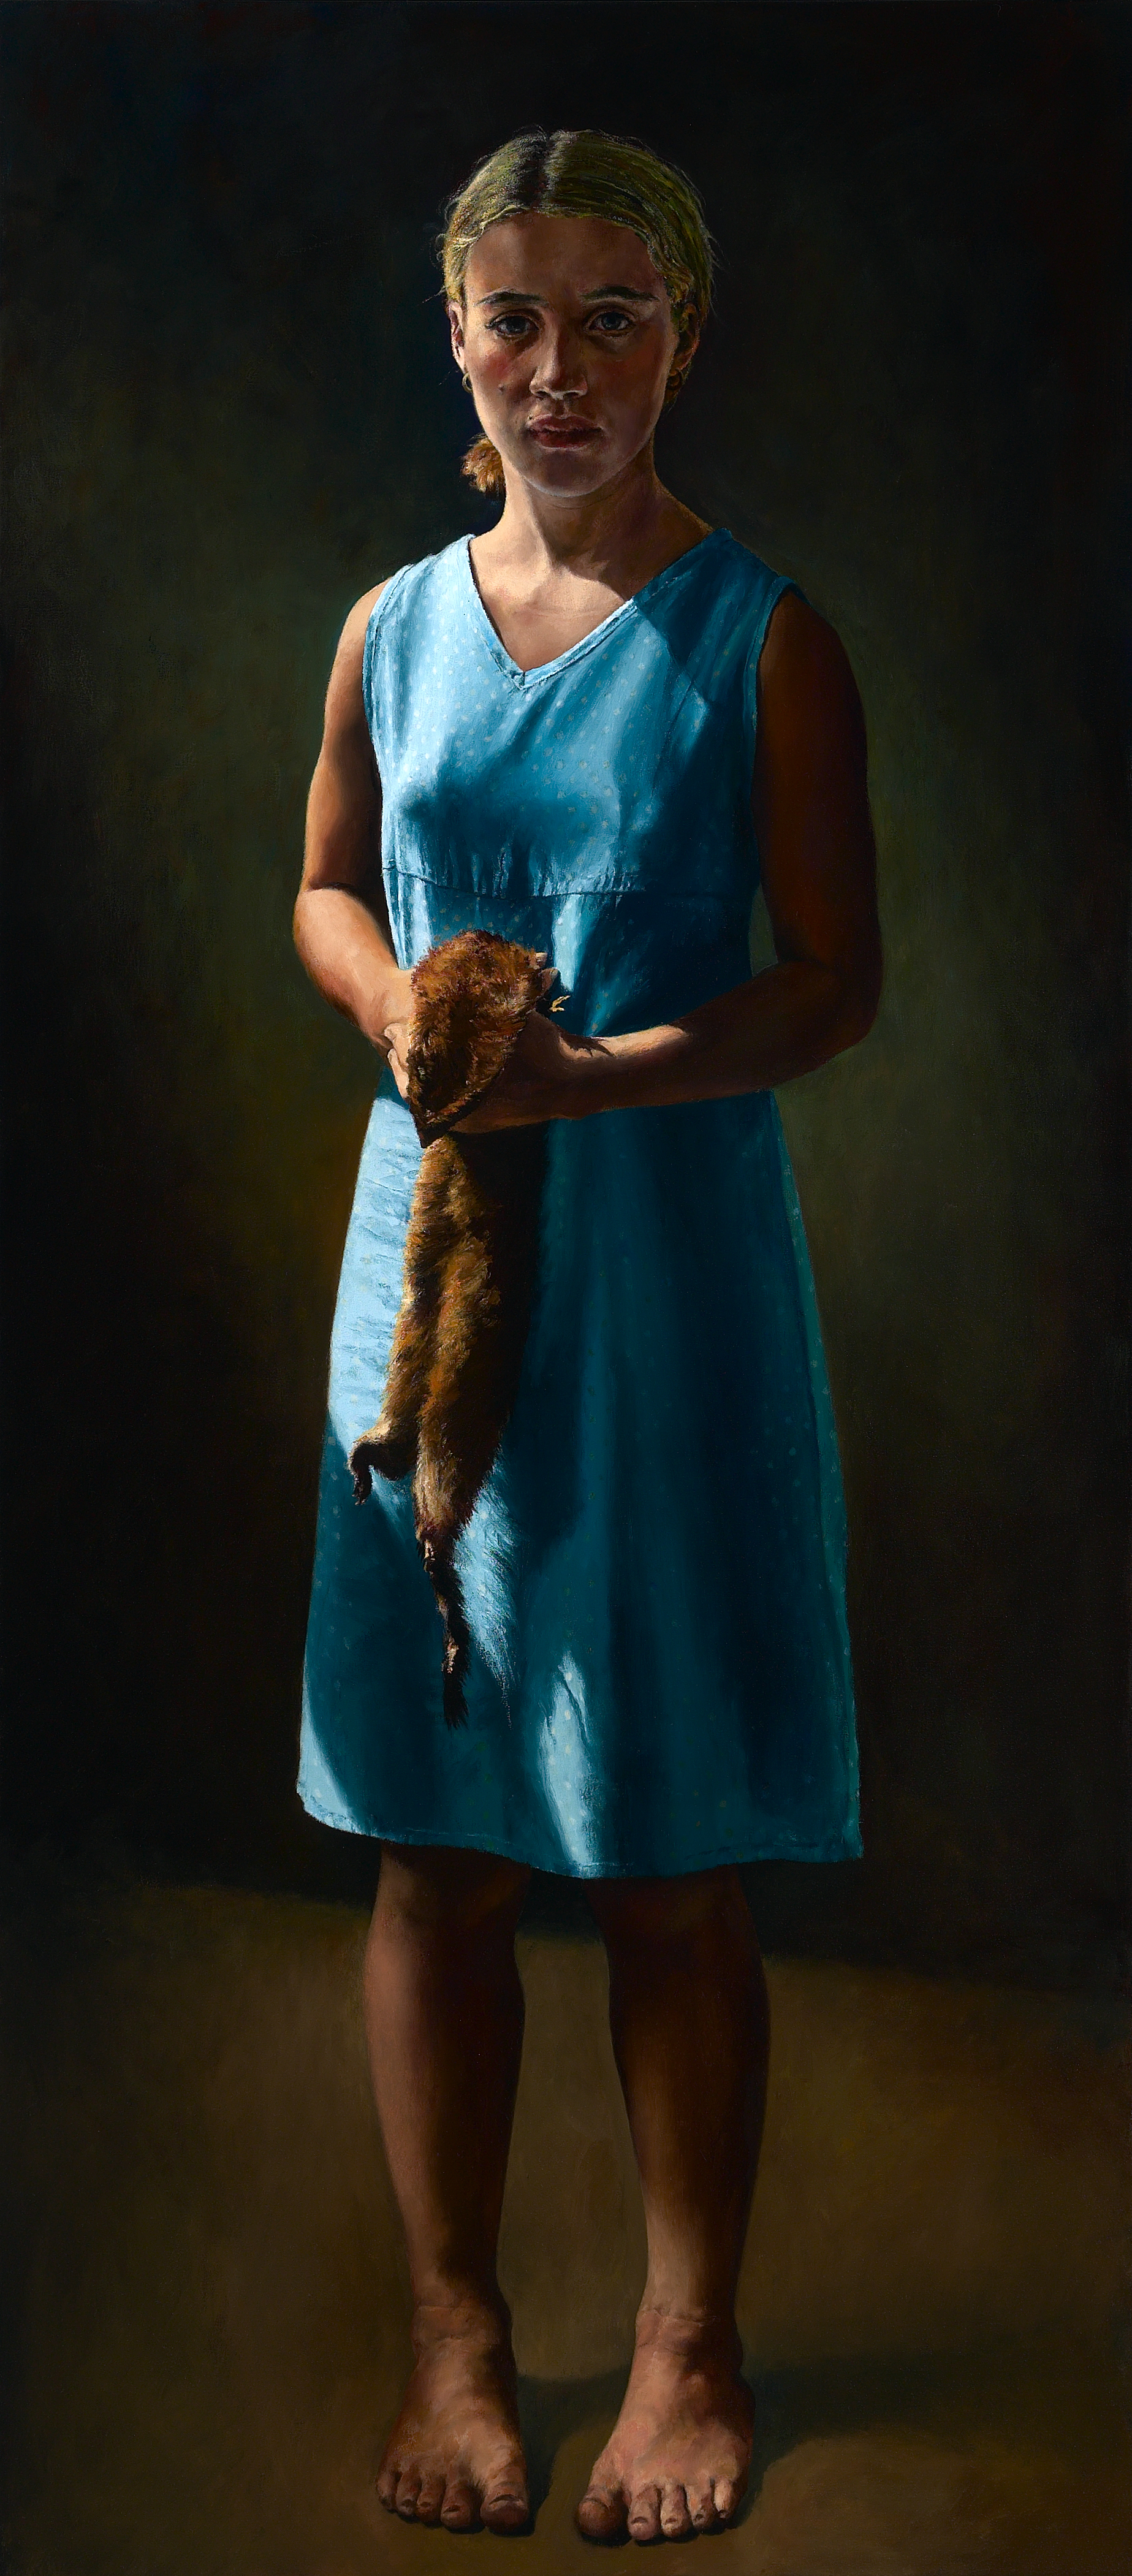   Girl With a Mink Pelt , Oil on Canvas, 2004, 64" x 28"  Outwin-Boochever Portrait Competition, Smithsonian Institution, Washington D.C,&nbsp;2006-8 